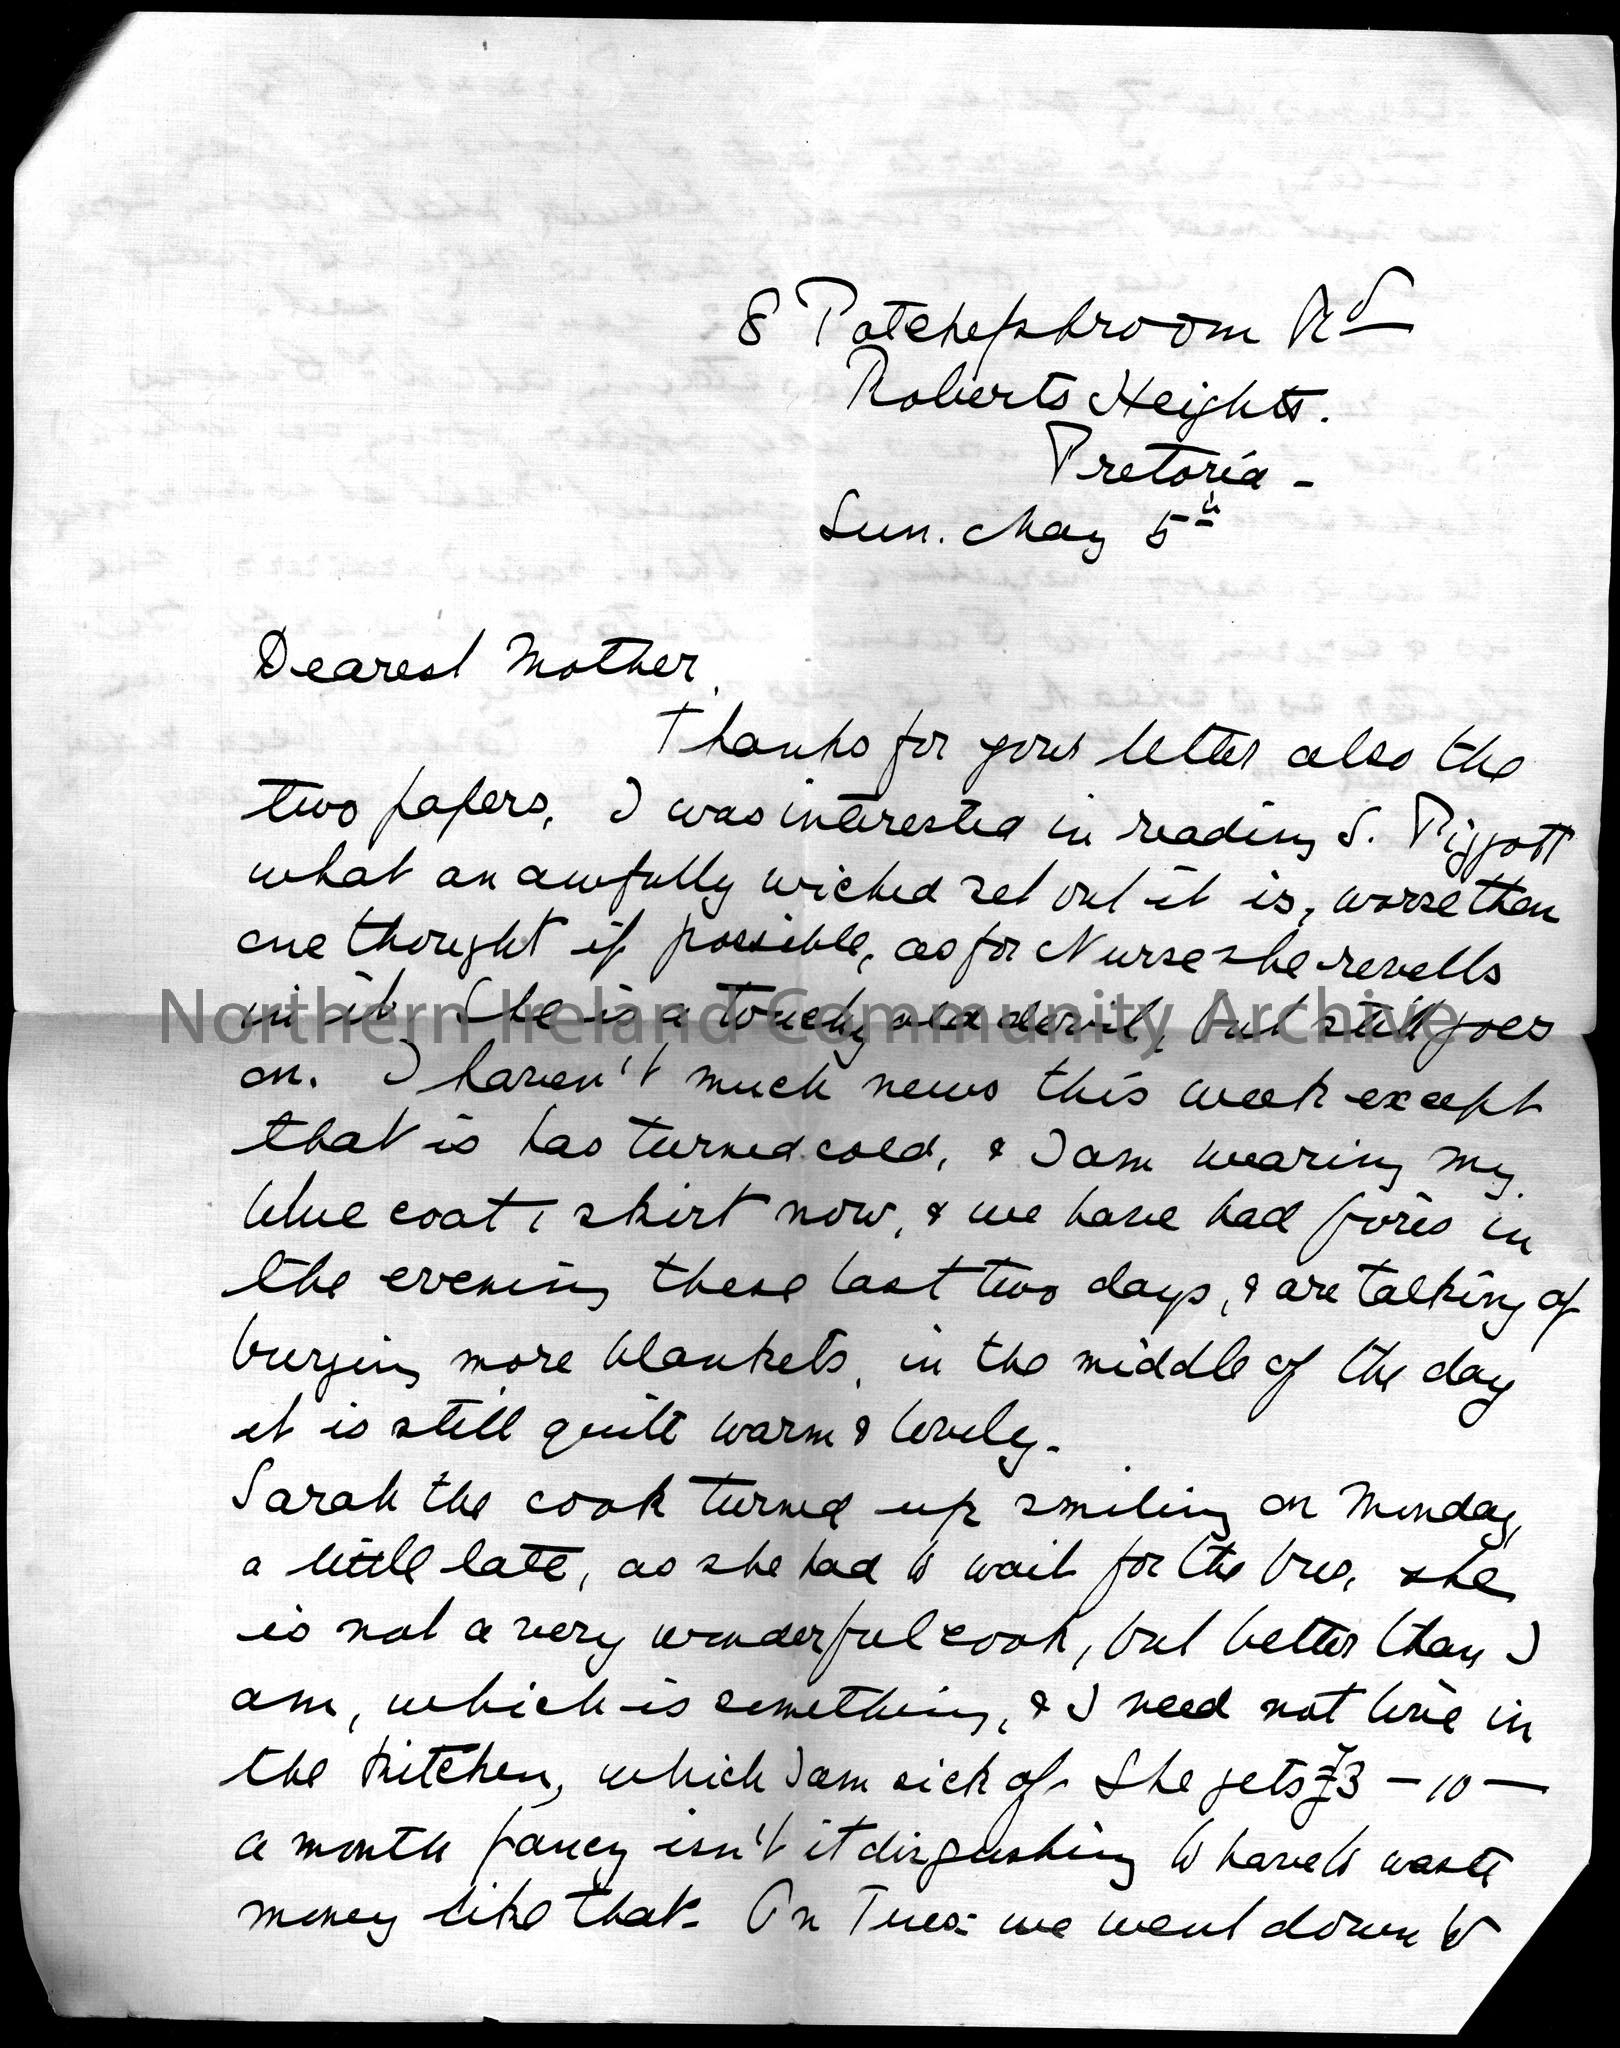 letter from Lady Dorothy Arter Hezlet to her mother, sent from Roberts Heights Pretoria, dated Sun May 5th. Dorothy writes of Sarah her cook and her w… – CM.2014.1238 front